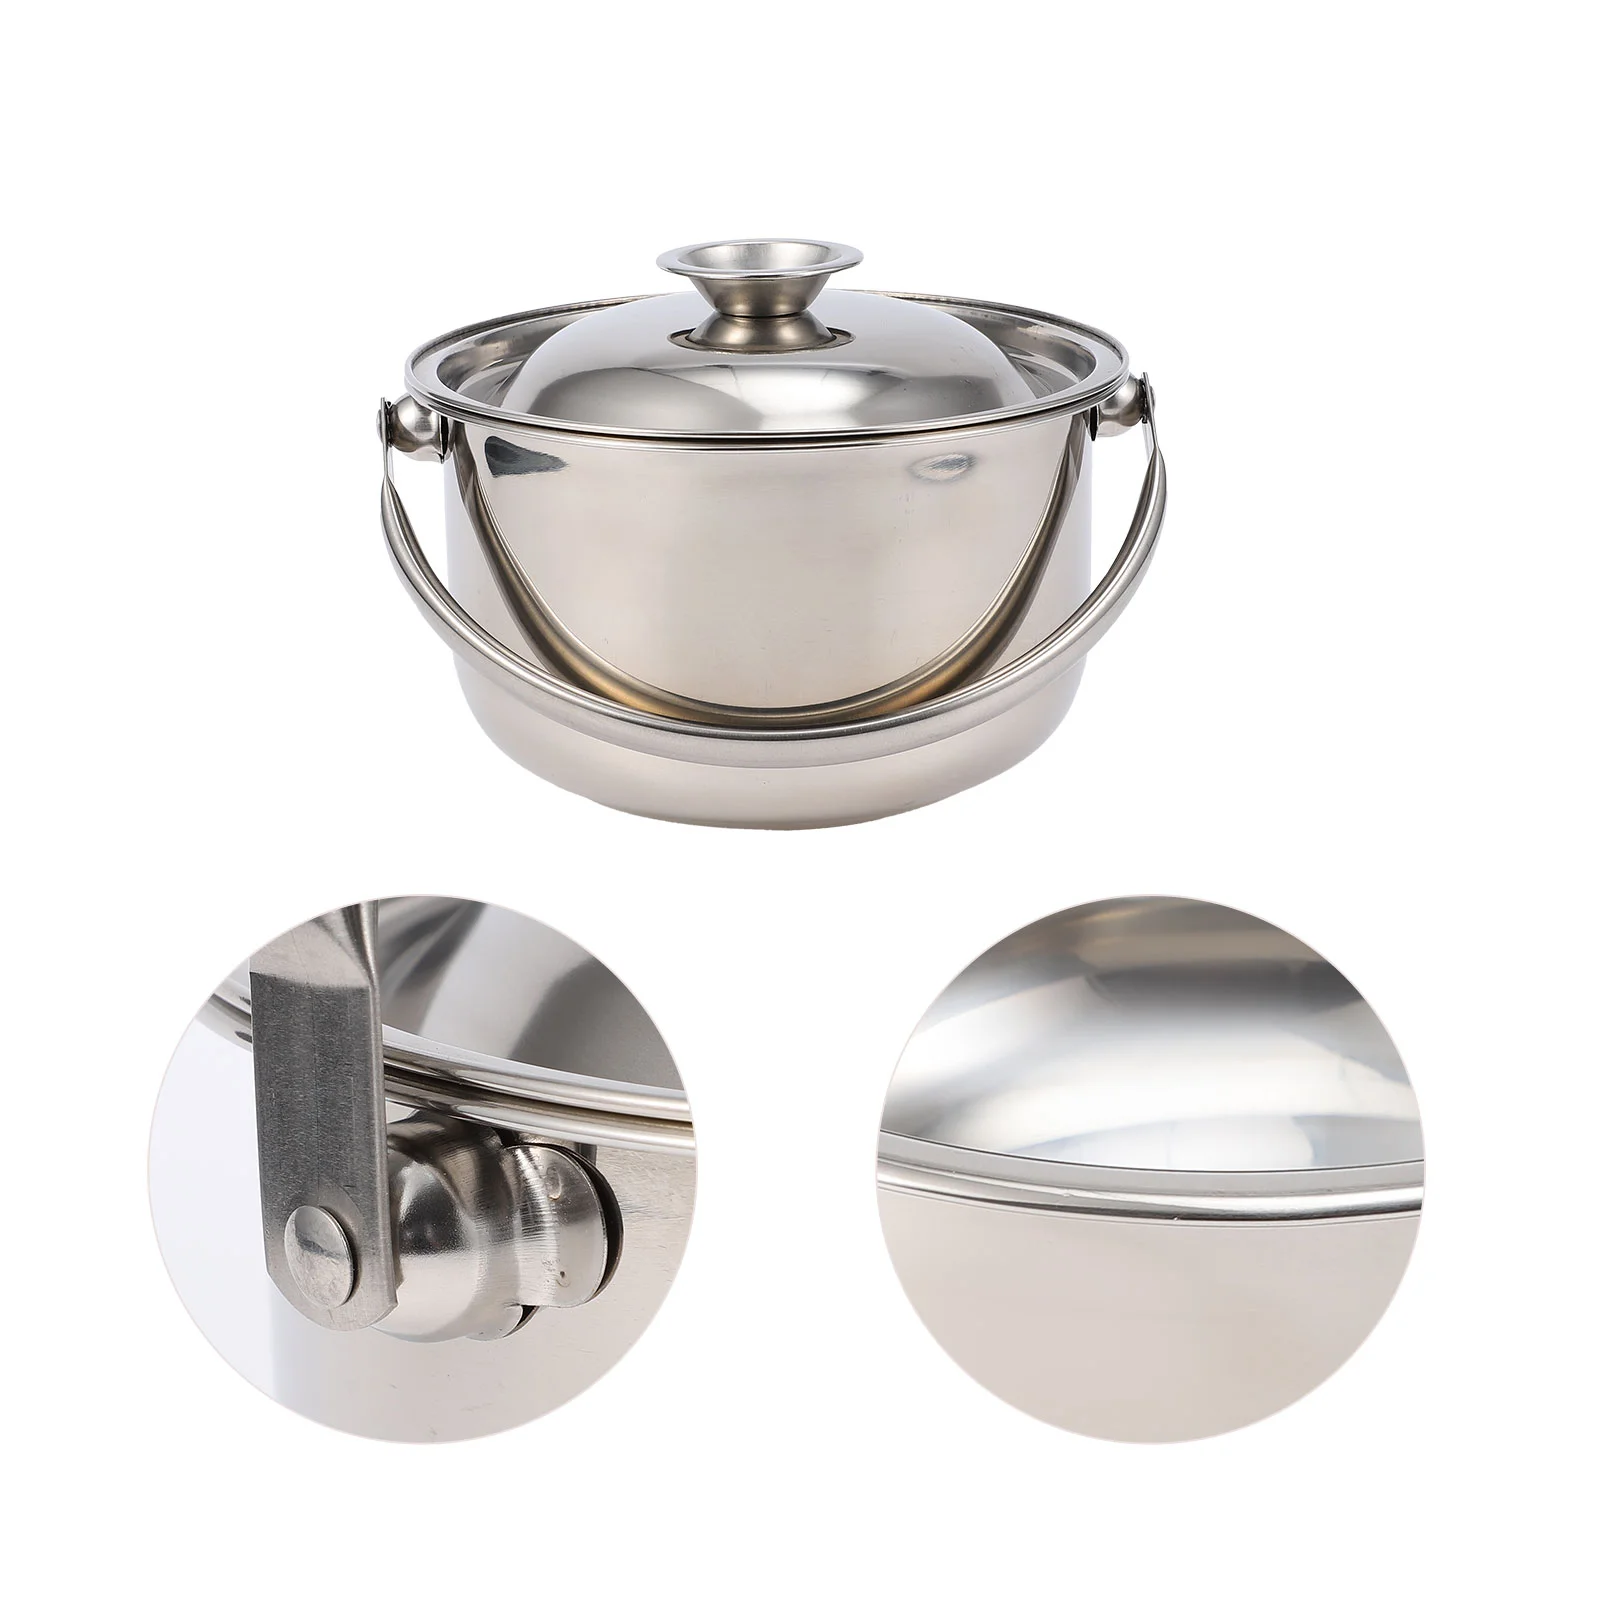 

Pot Steel Stainless Cooking Stew Stock Soup Hot Bowl Mixing Shabu Bowls Pan Noodle Stockpot Sauce Metal Pasta Steam Steamer